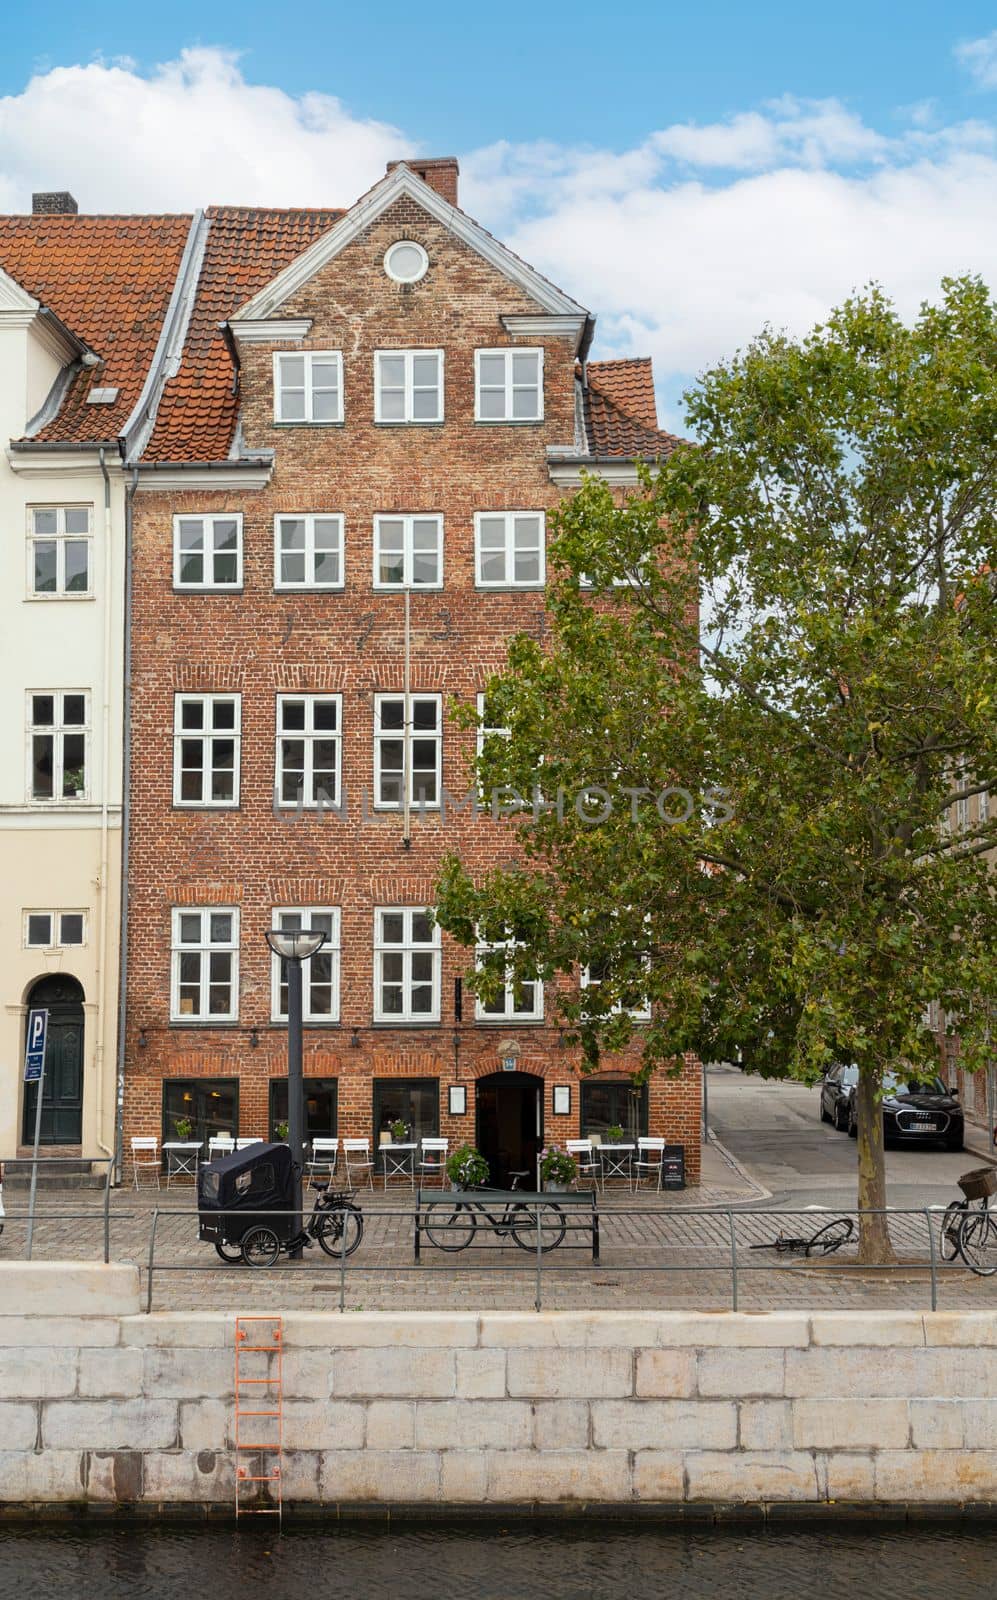 Copenhagen, Denmark. October 2022. A view of the typical house facades on the streets in the city center